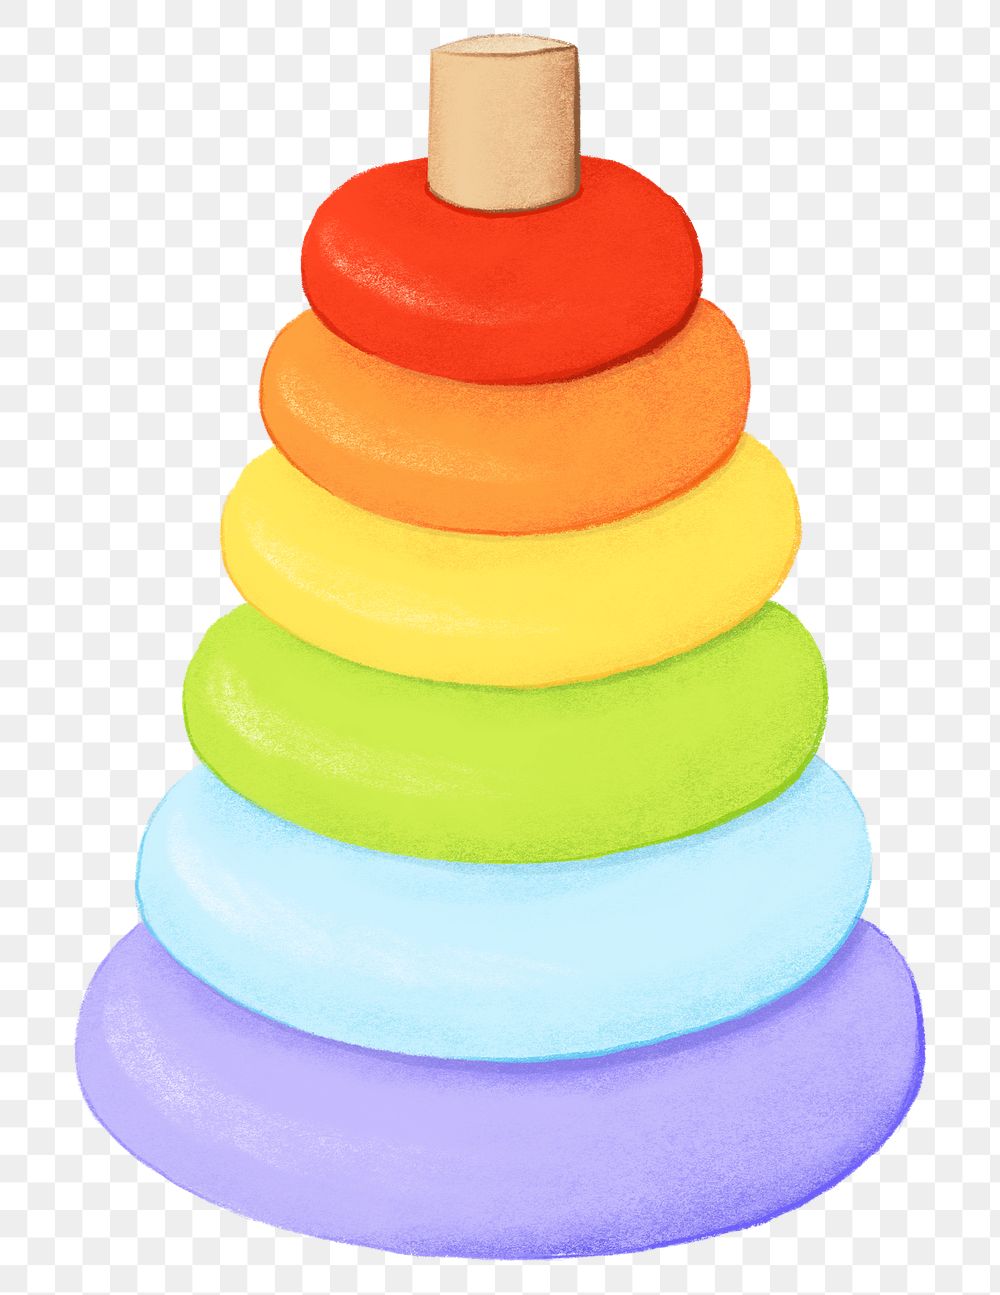 Colorful conical tower png sticker, baby's toy graphic, transparent background